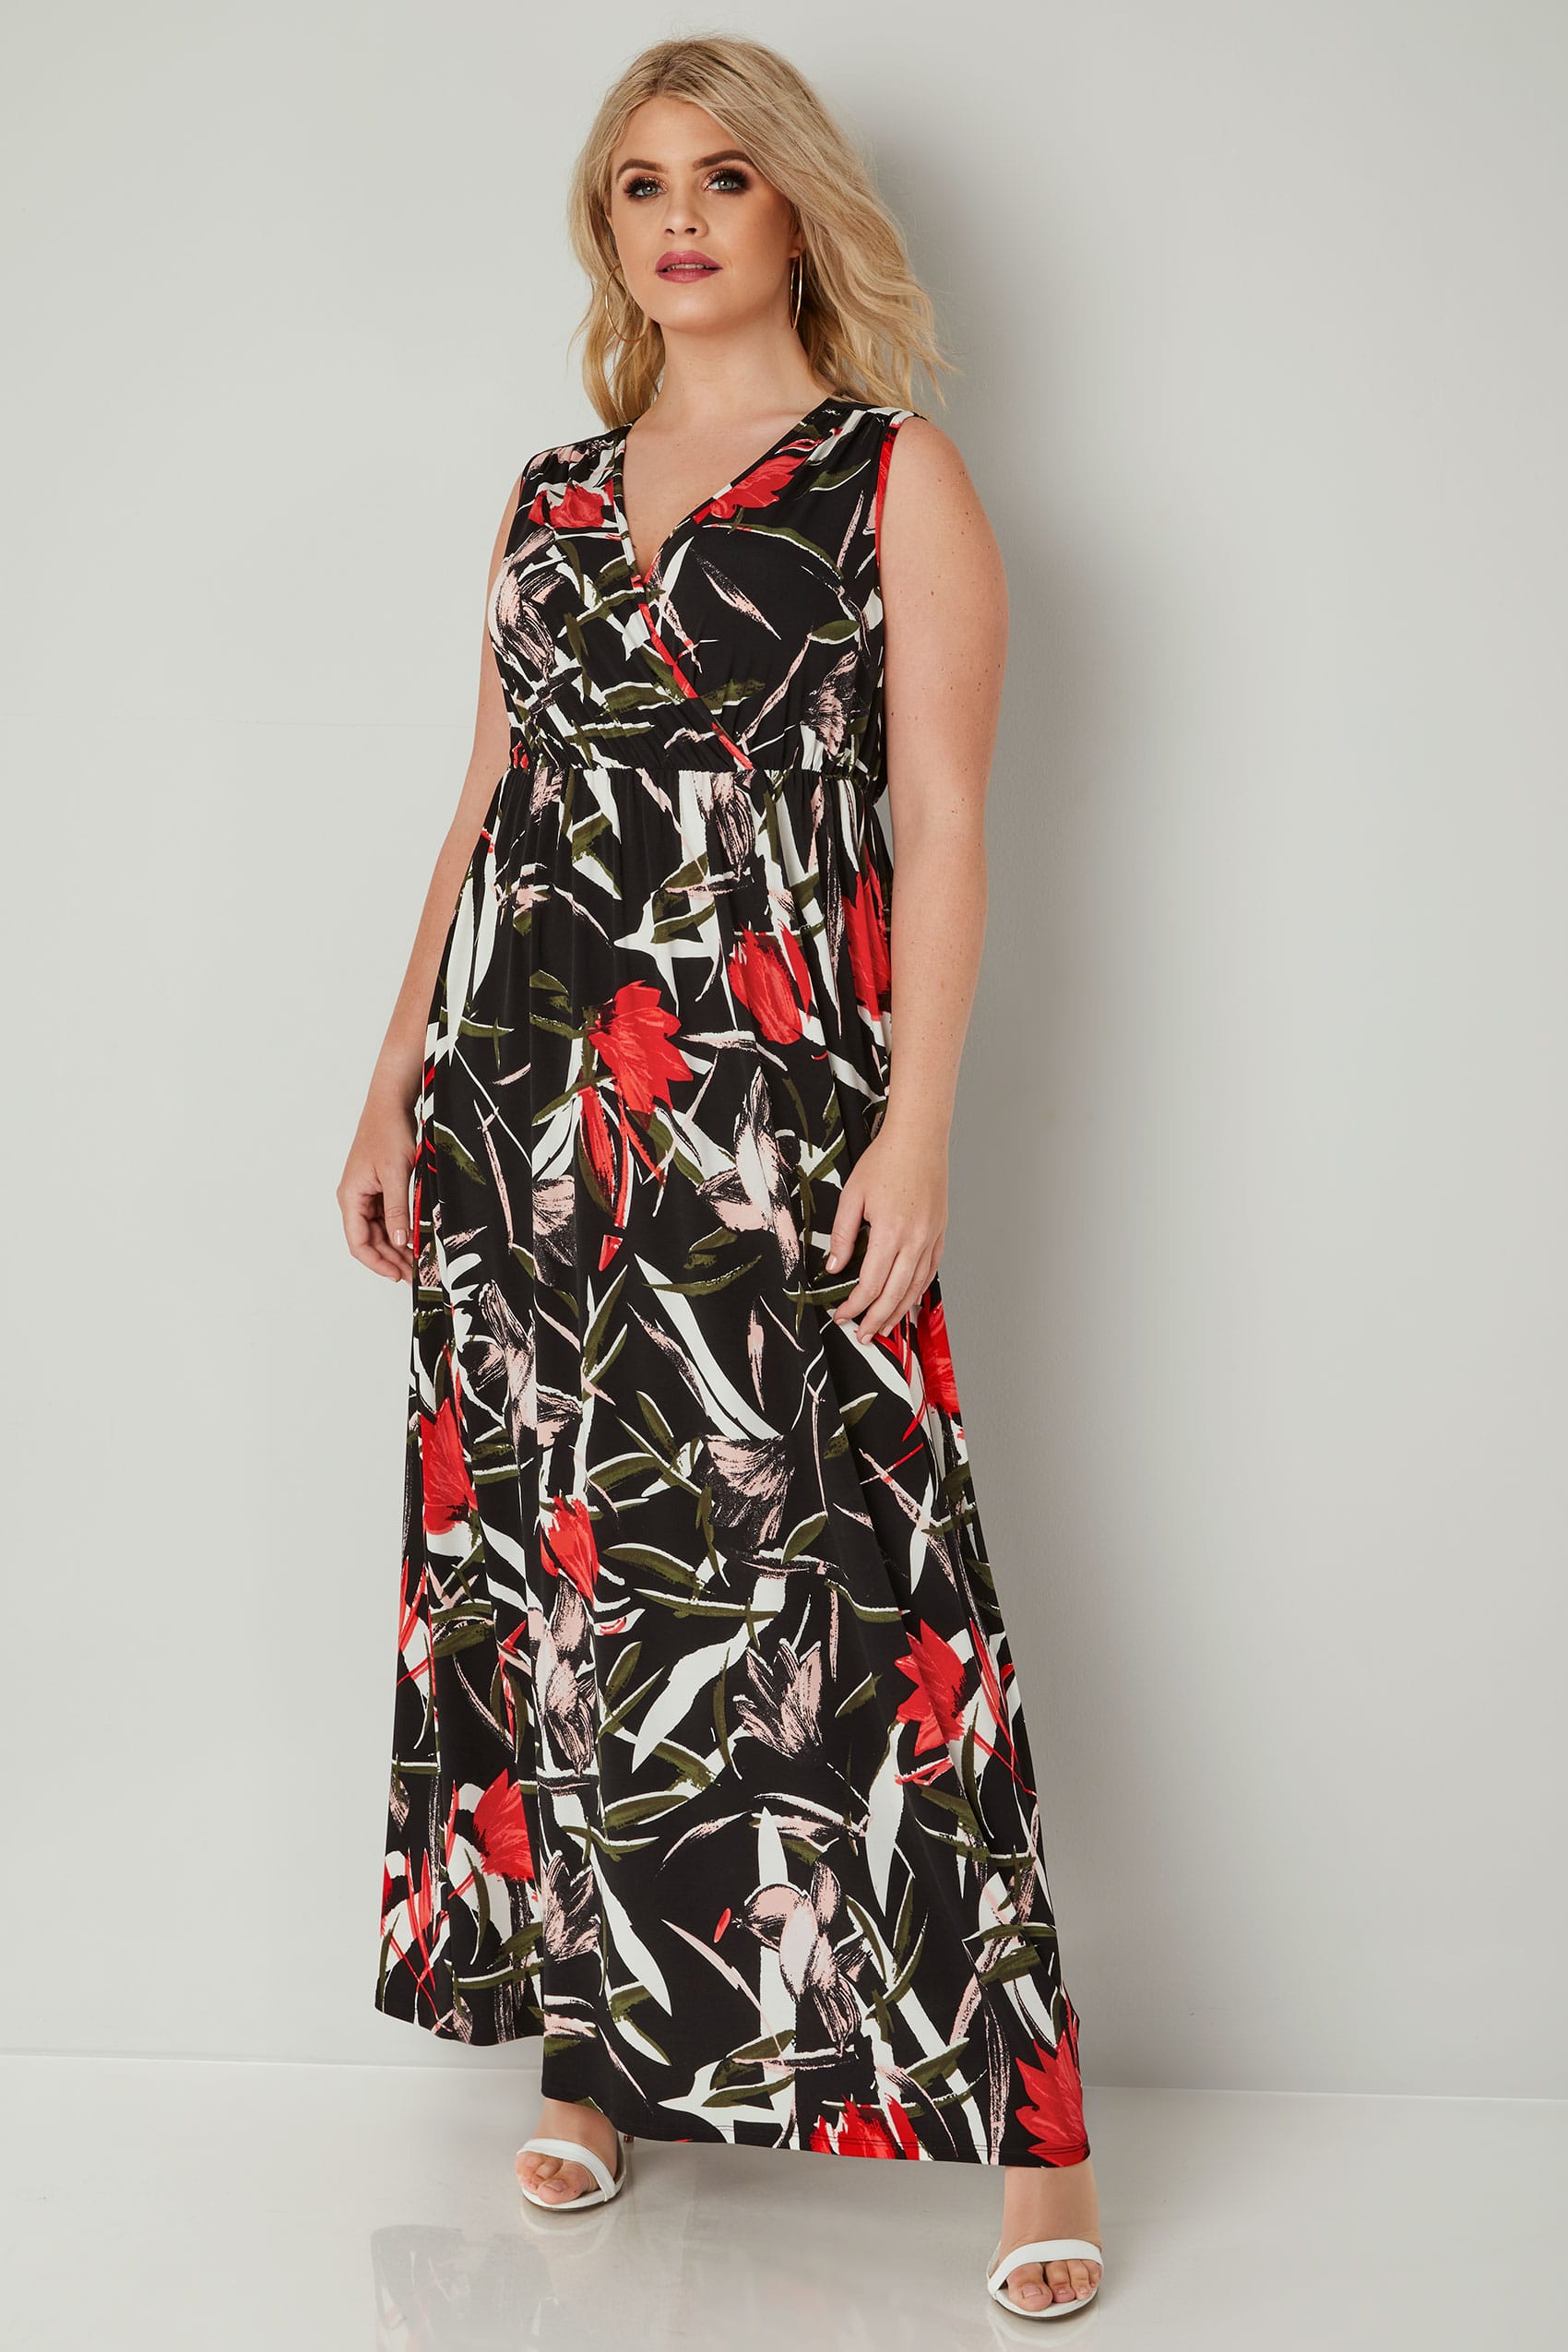 Black And Multi Floral Print Wrap Maxi Dress With Elasticated Waist Plus Size 16 To 36